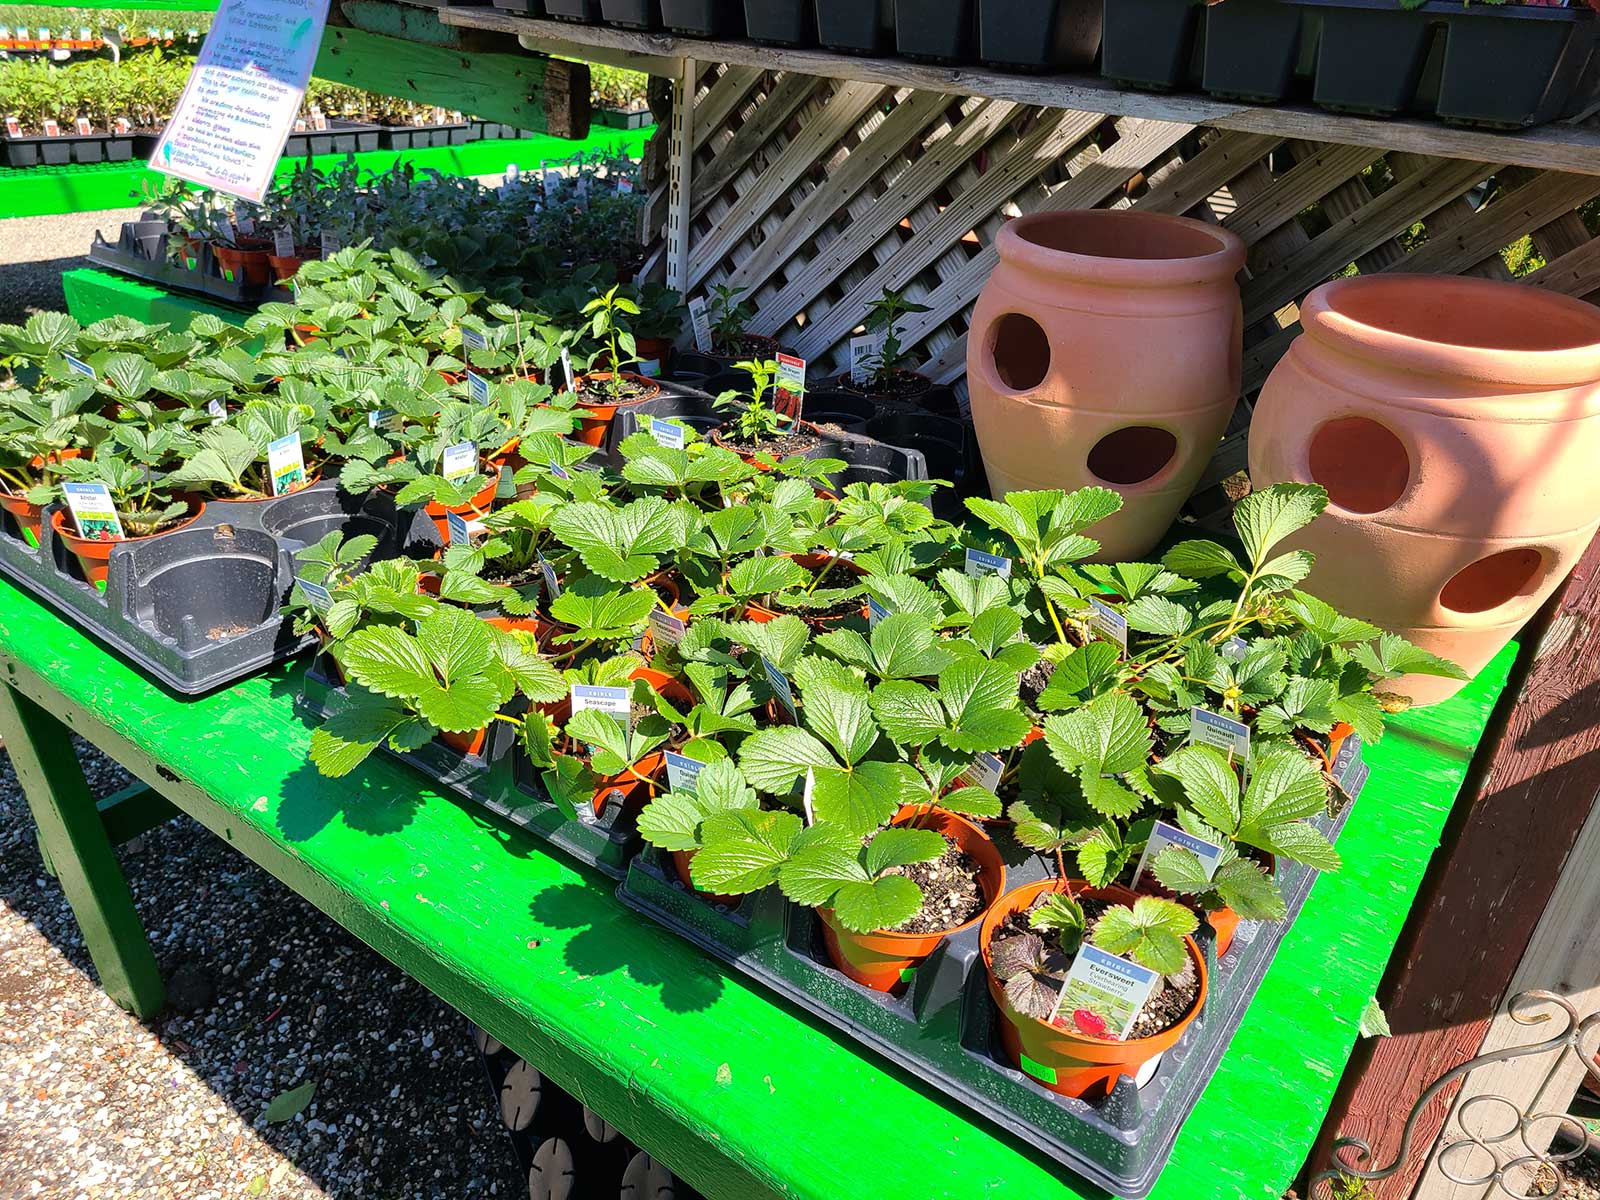 4 Inch Potted Strawberries - $3.99 each